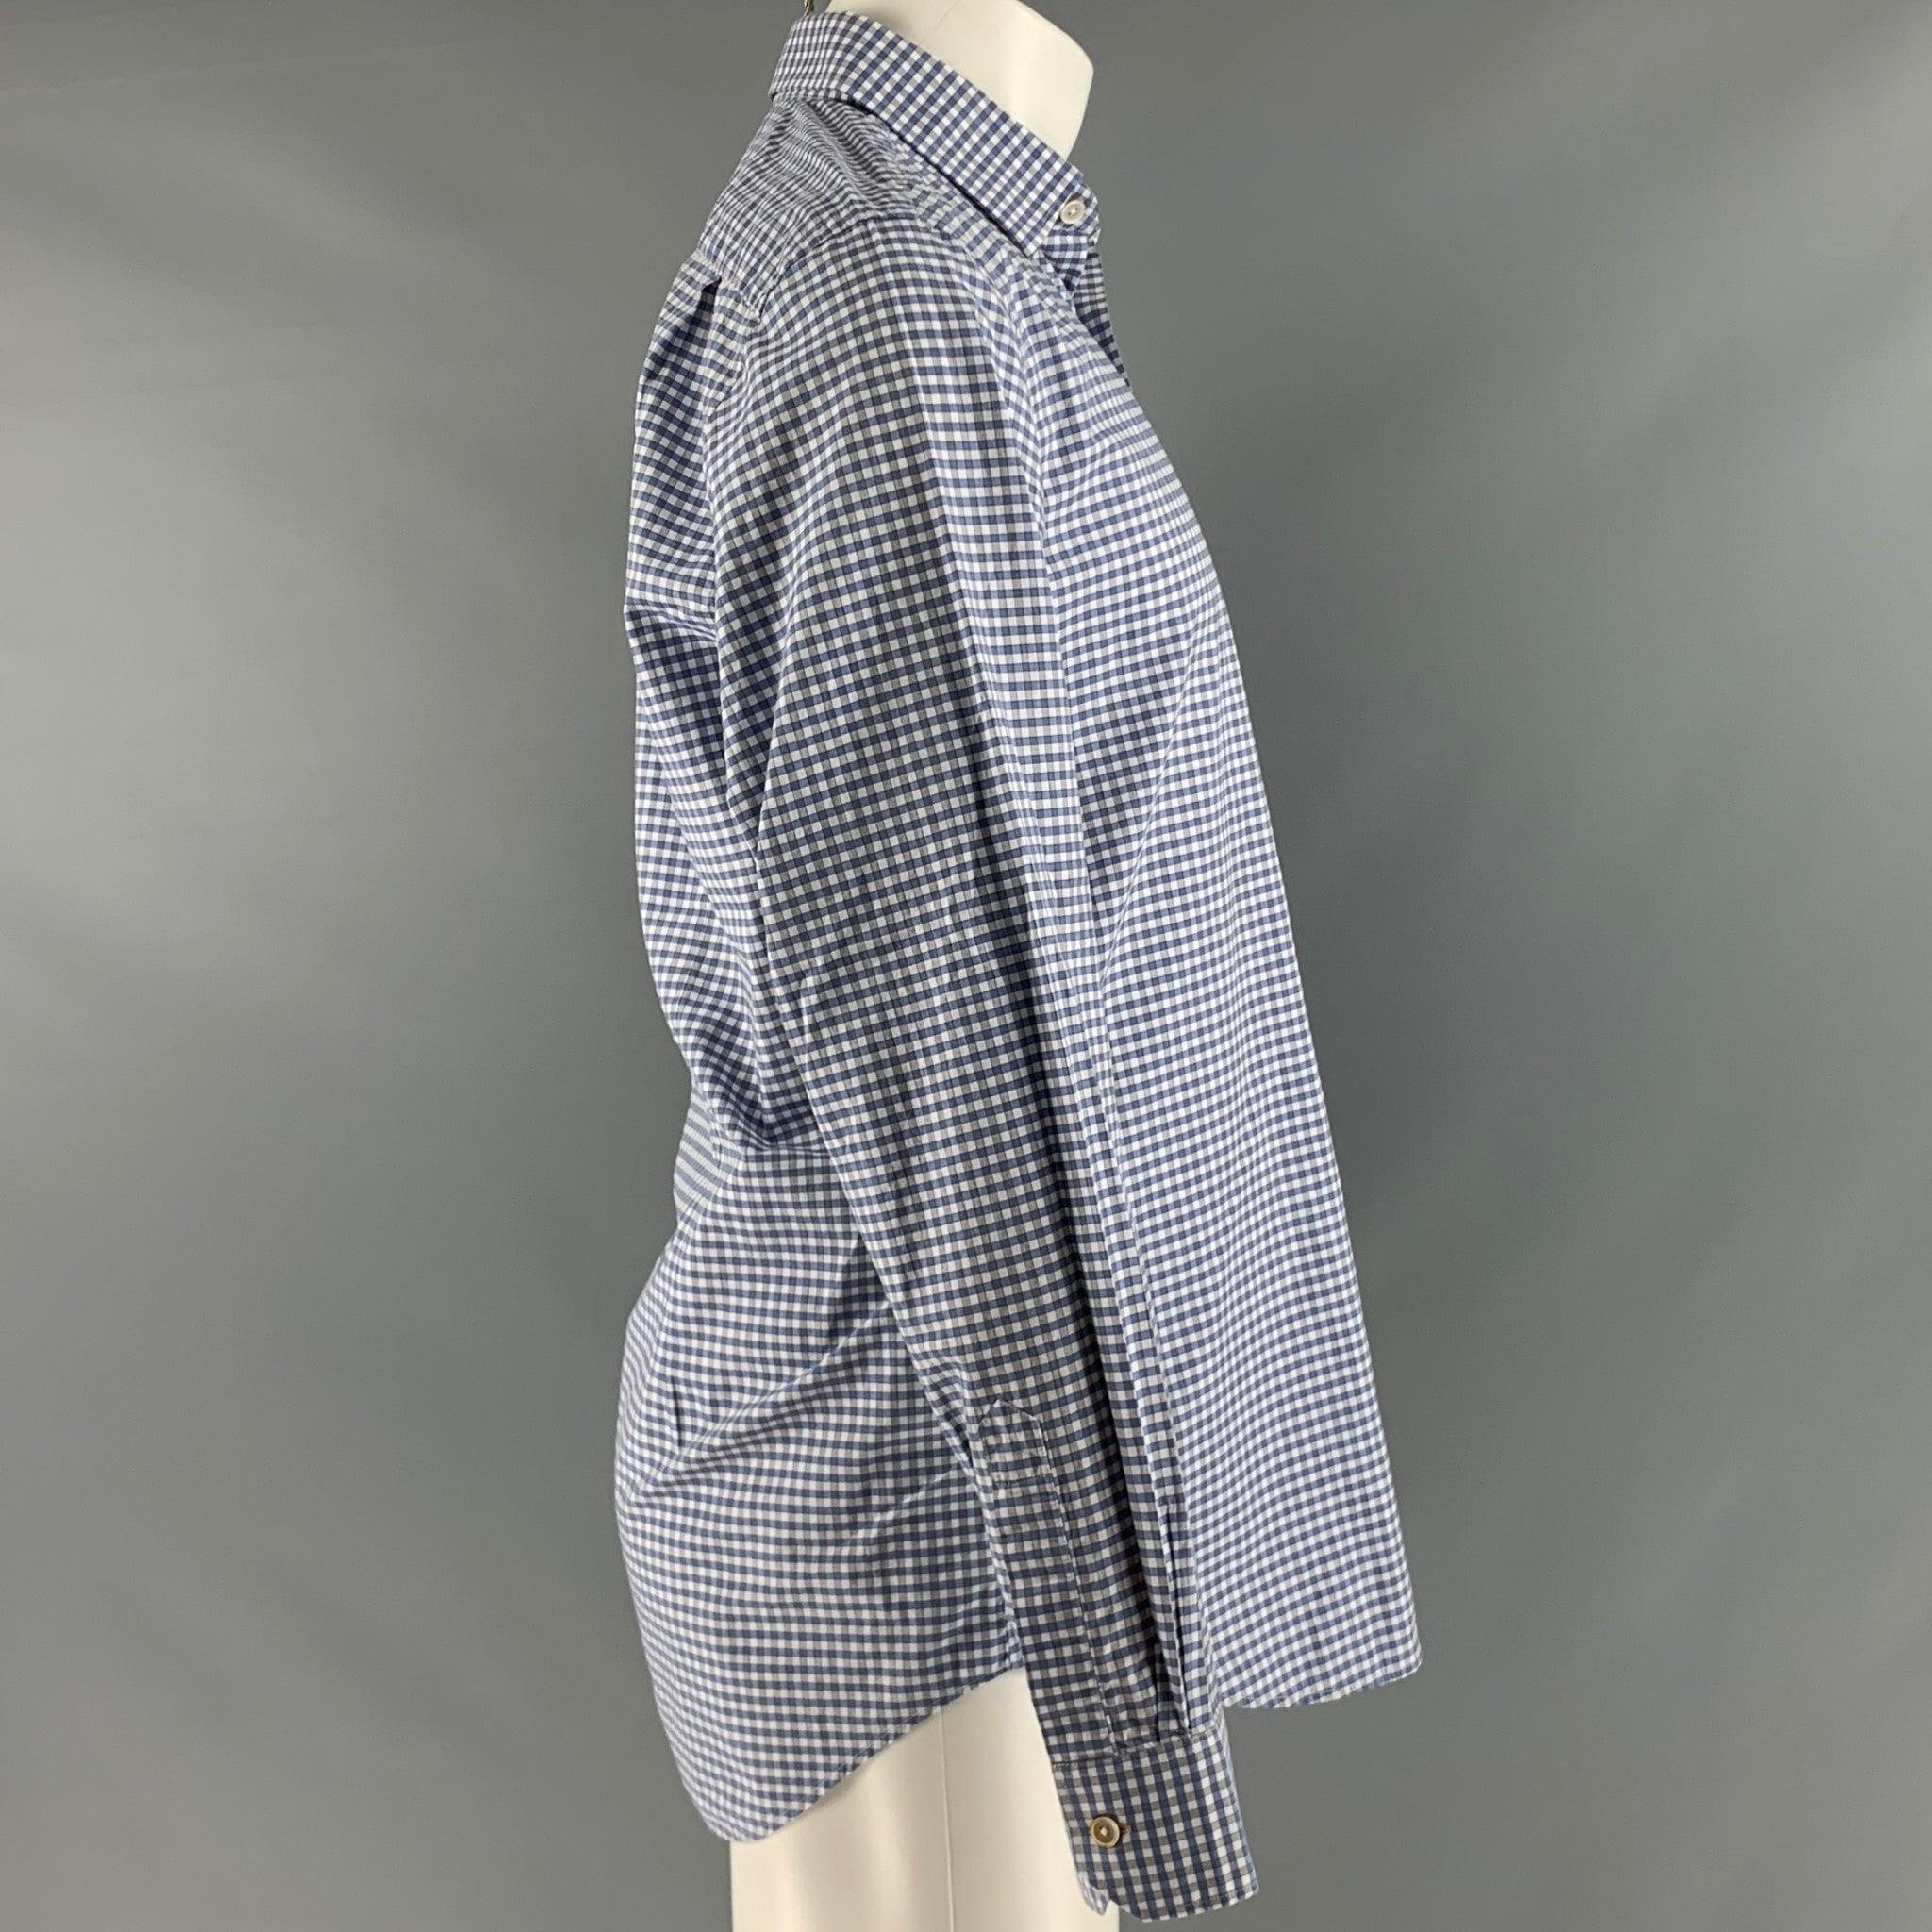 PAUL SMITH long sleeve shirt
in a blue and white cotton fabric featuring gingham pattern, spread collar, and button closure.Very Good Pre-Owned Condition. Minor pilling throughout. 

Marked:   15.5